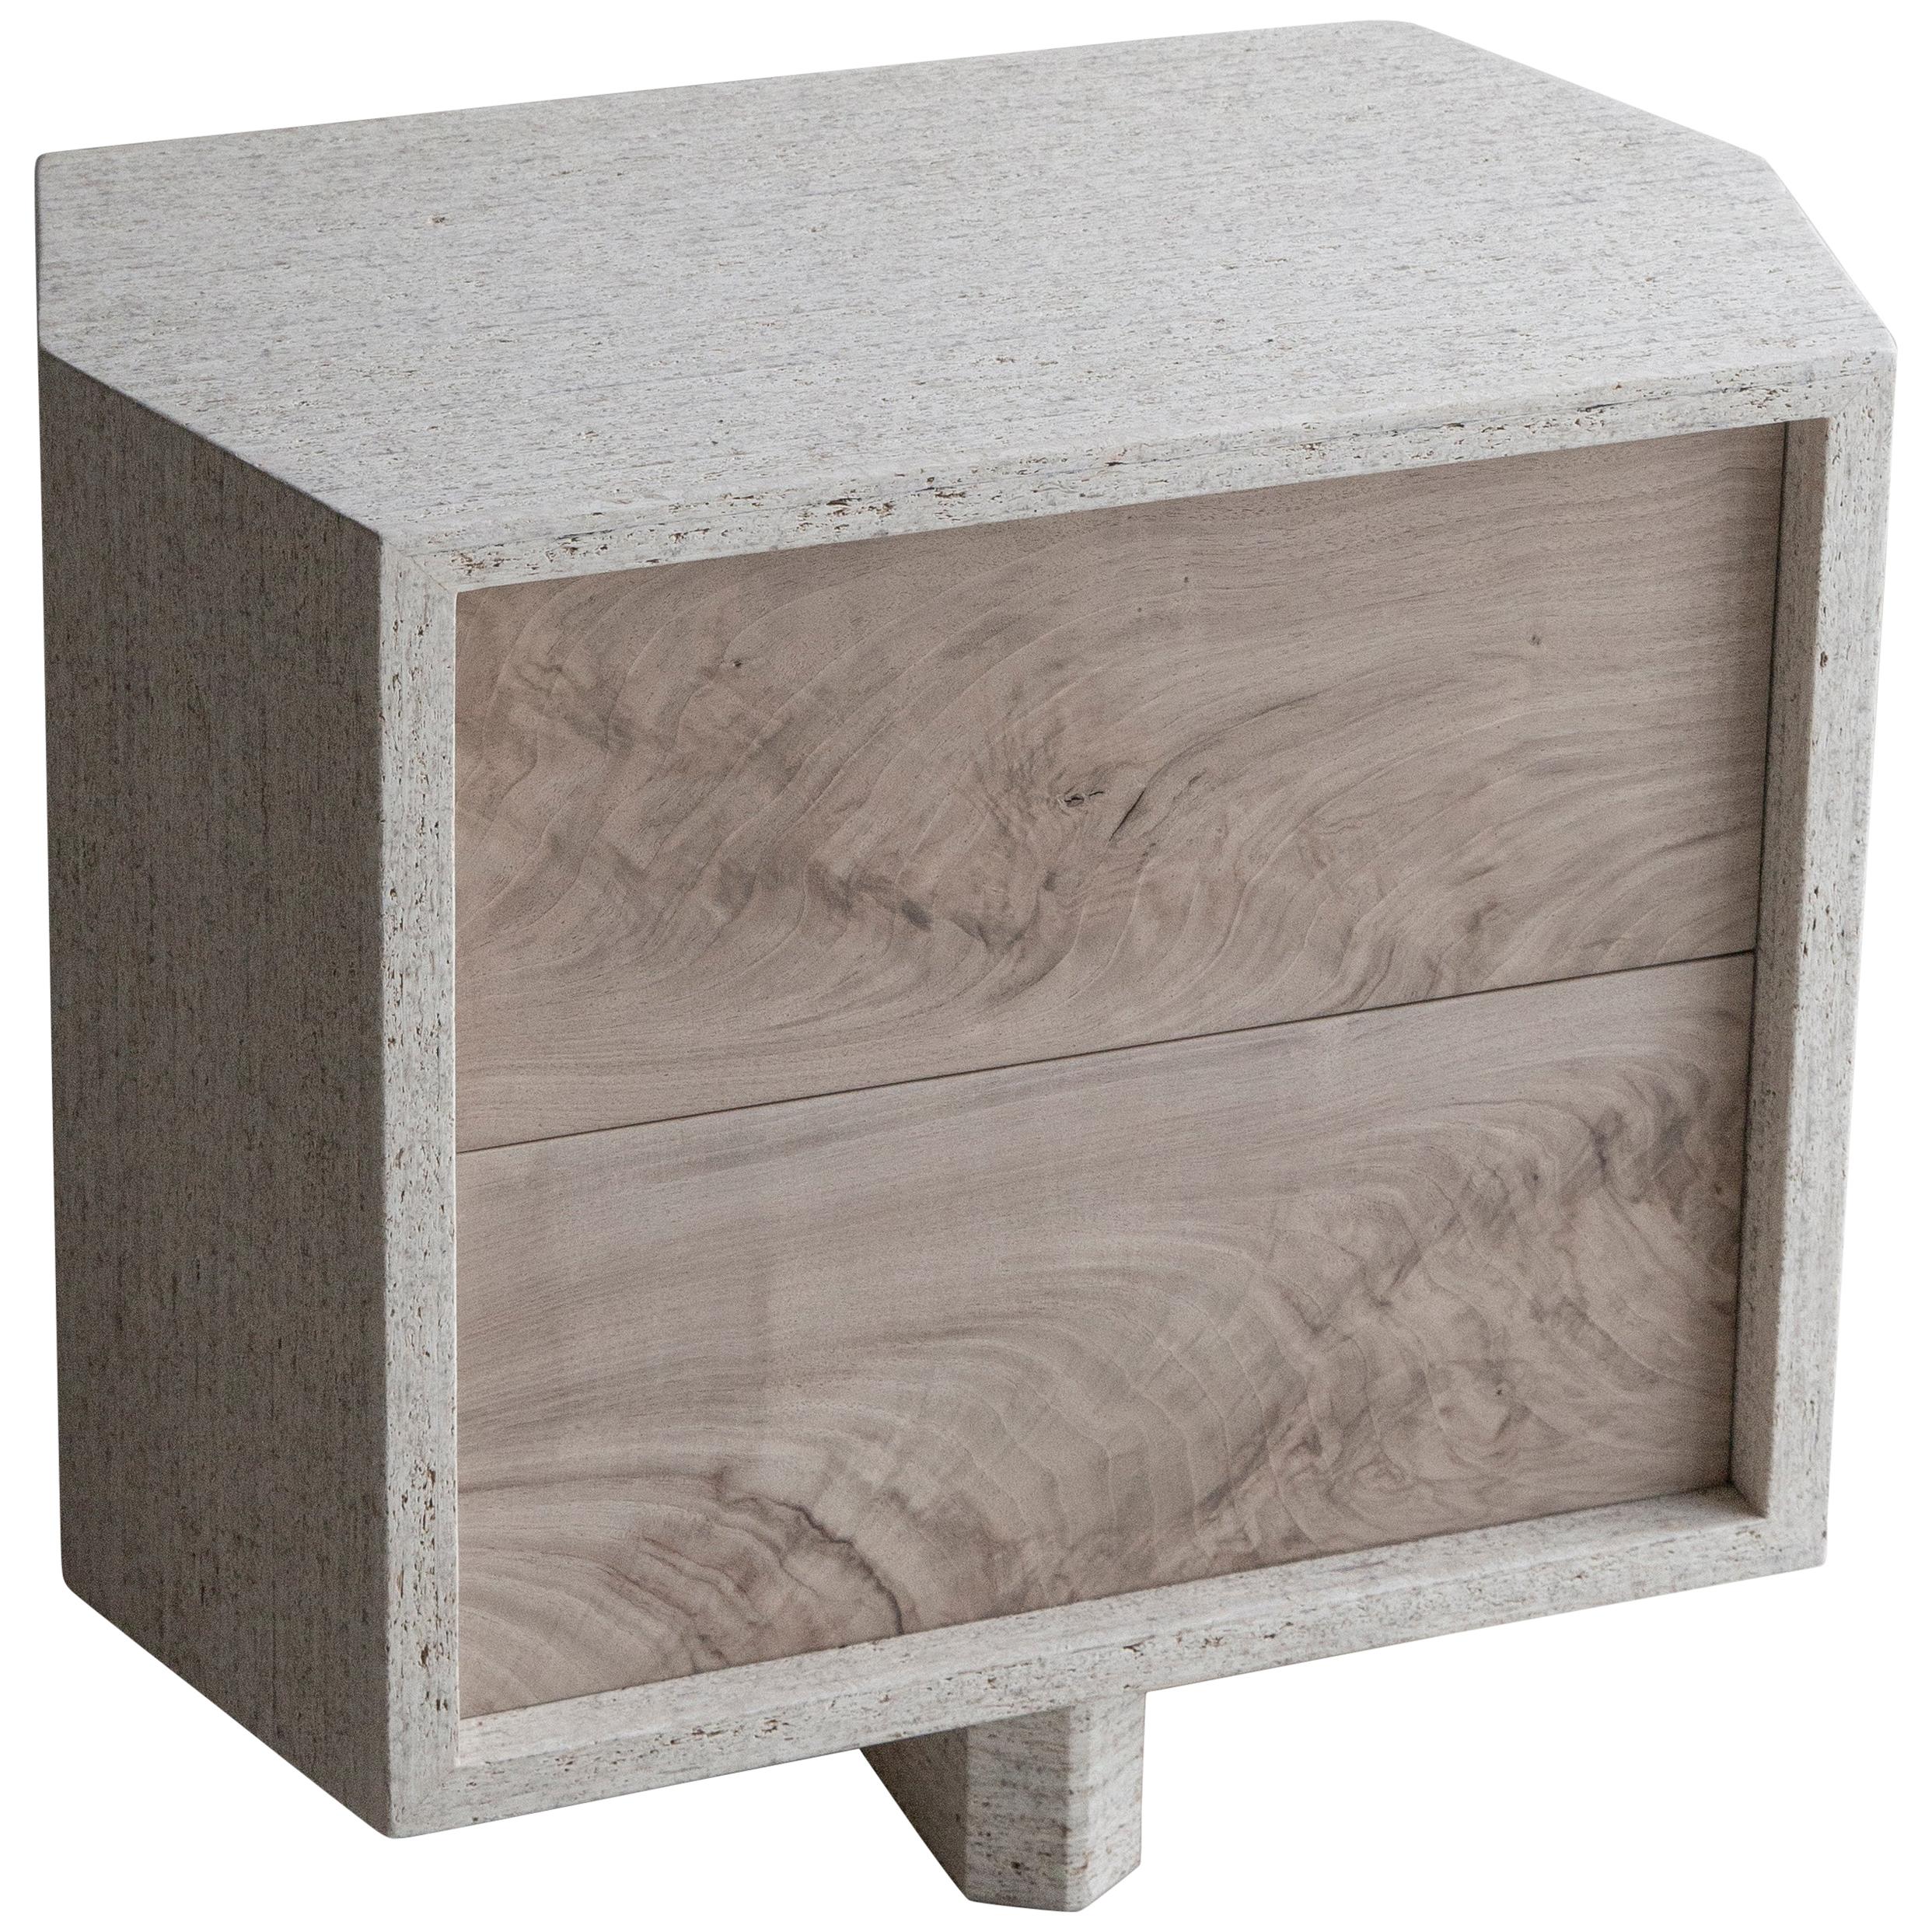 Struttura Mini Case Table in Natural Maykume & Bleached Walnut by May Furniture